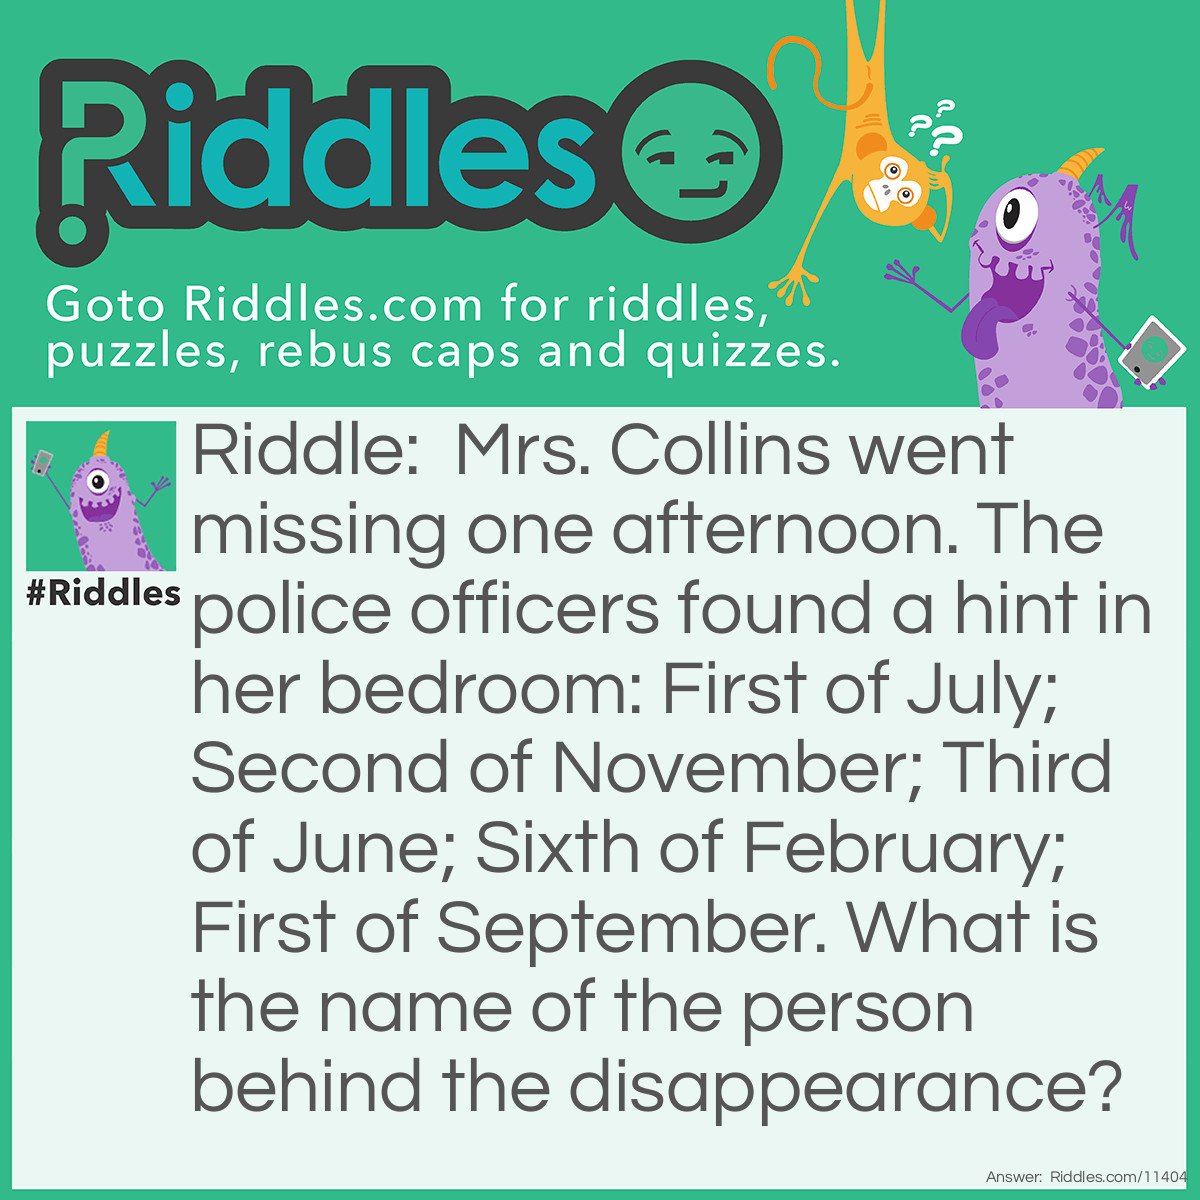 Riddle: Mrs. Collins went missing one afternoon. The police officers found a hint in her bedroom: First of July; Second of November; Third of June; Sixth of February; First of September. What is the name of the person behind the disappearance? Answer: This person's name is Jonas. "First of July" means the first letter of July (J), "Second of November" means the second letter of November (O), and so on.